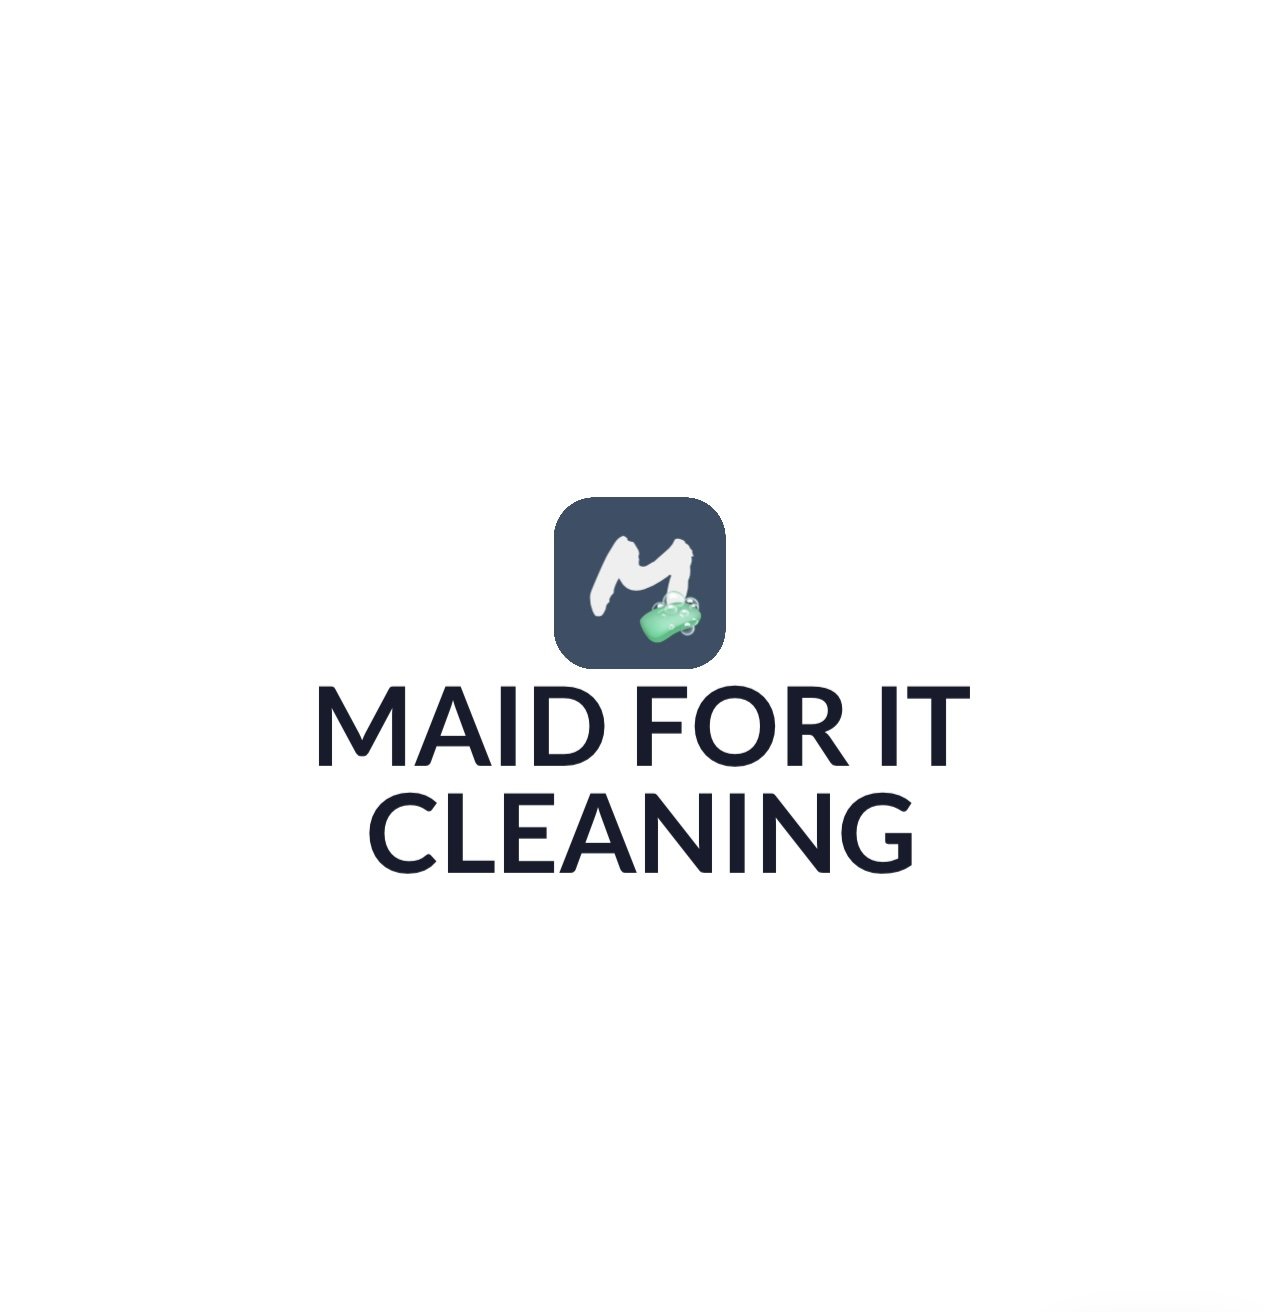 MAID FOR IT CLEANING